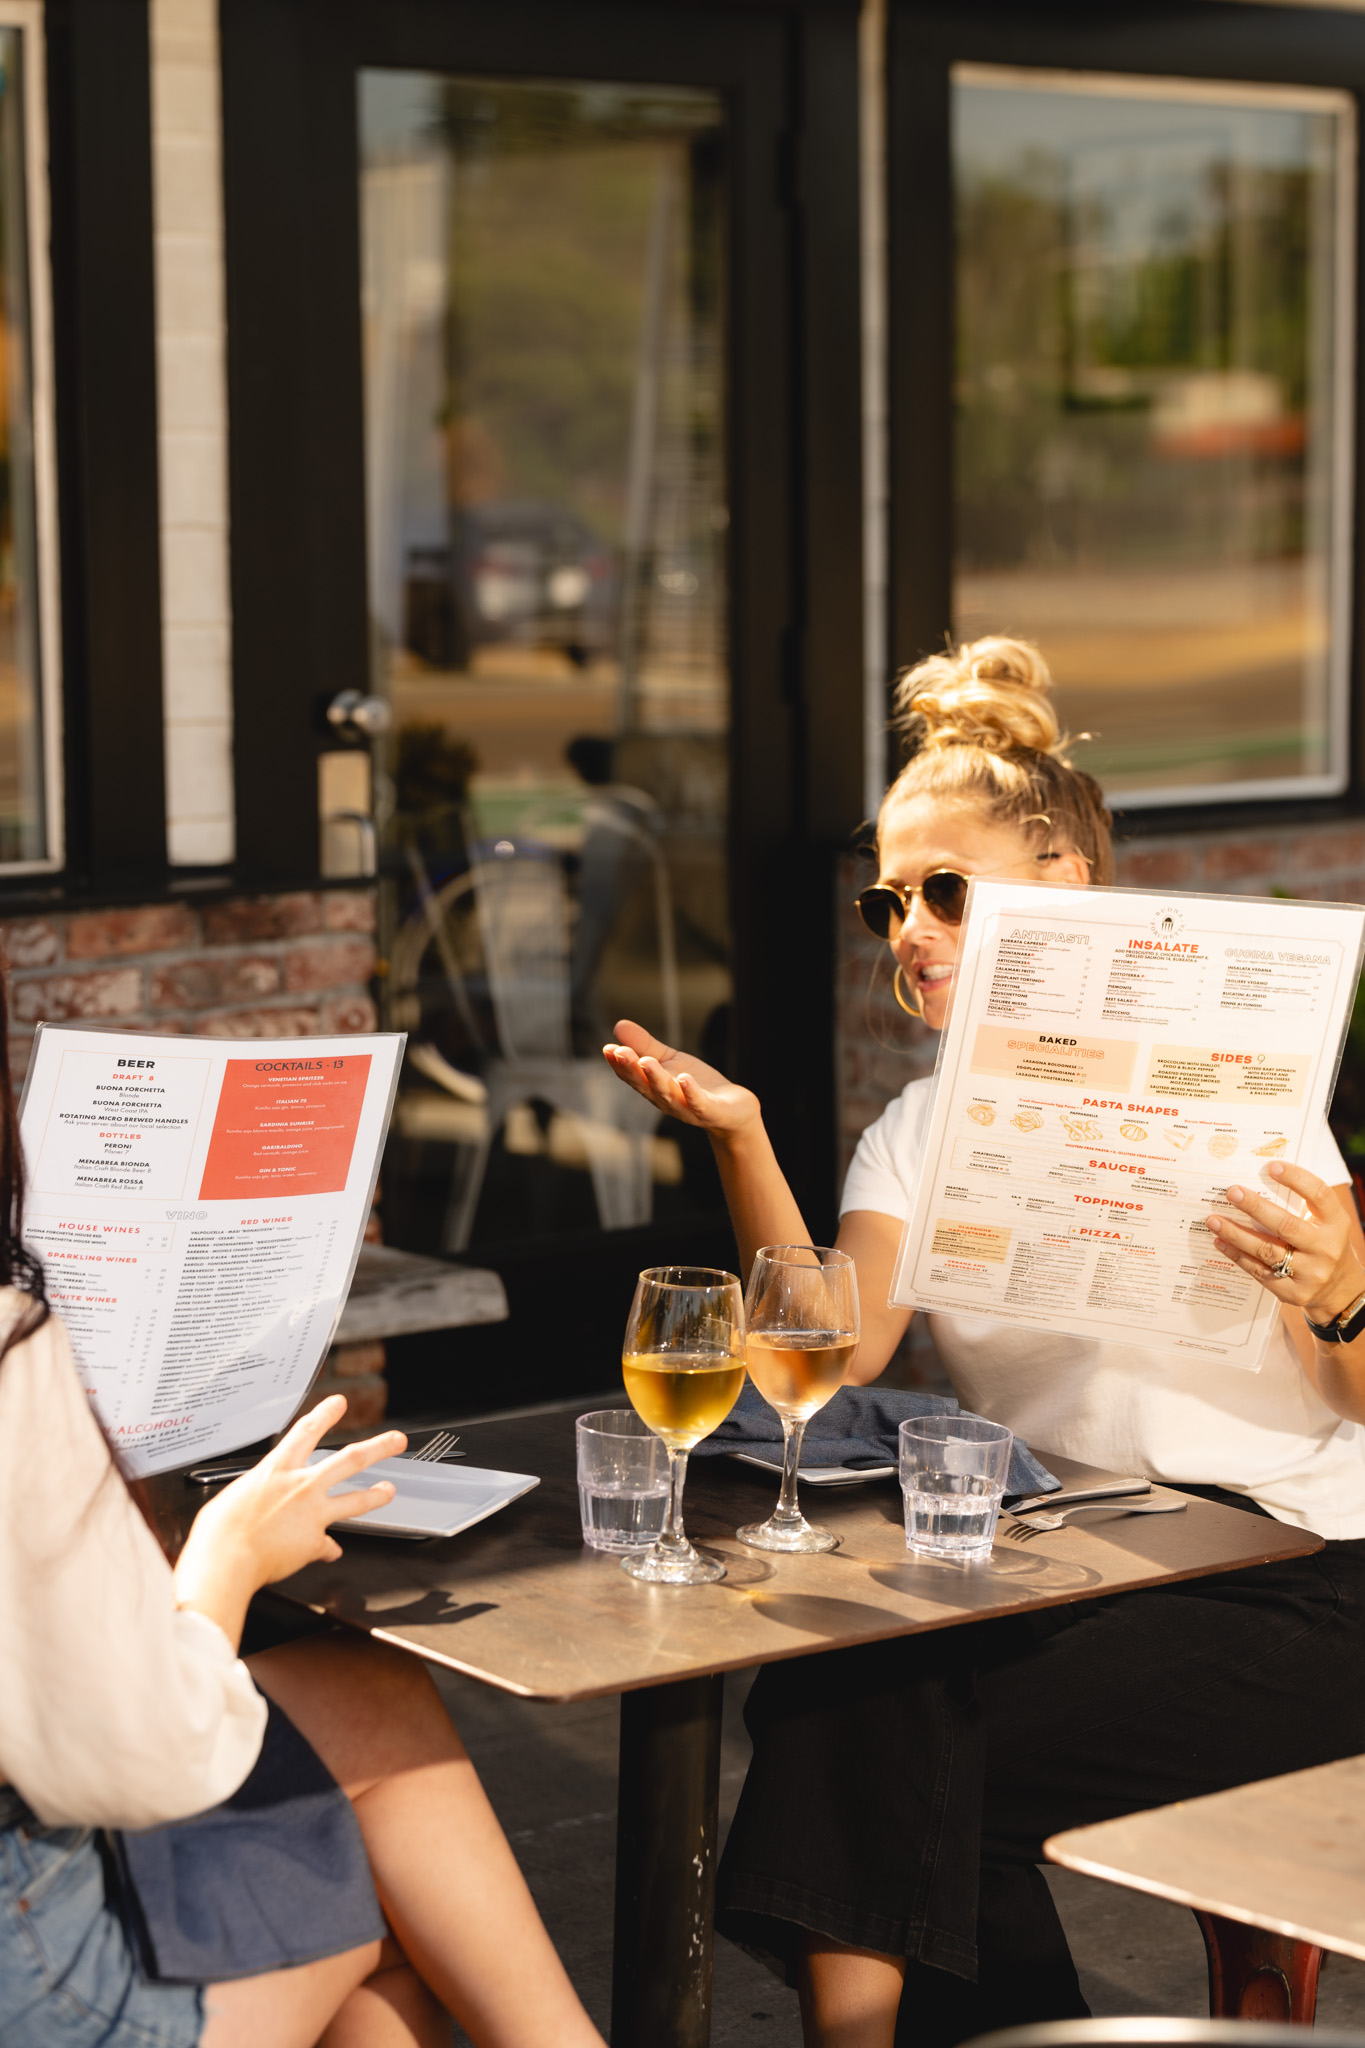 Ladies chatting at a table outdoors while holding menus